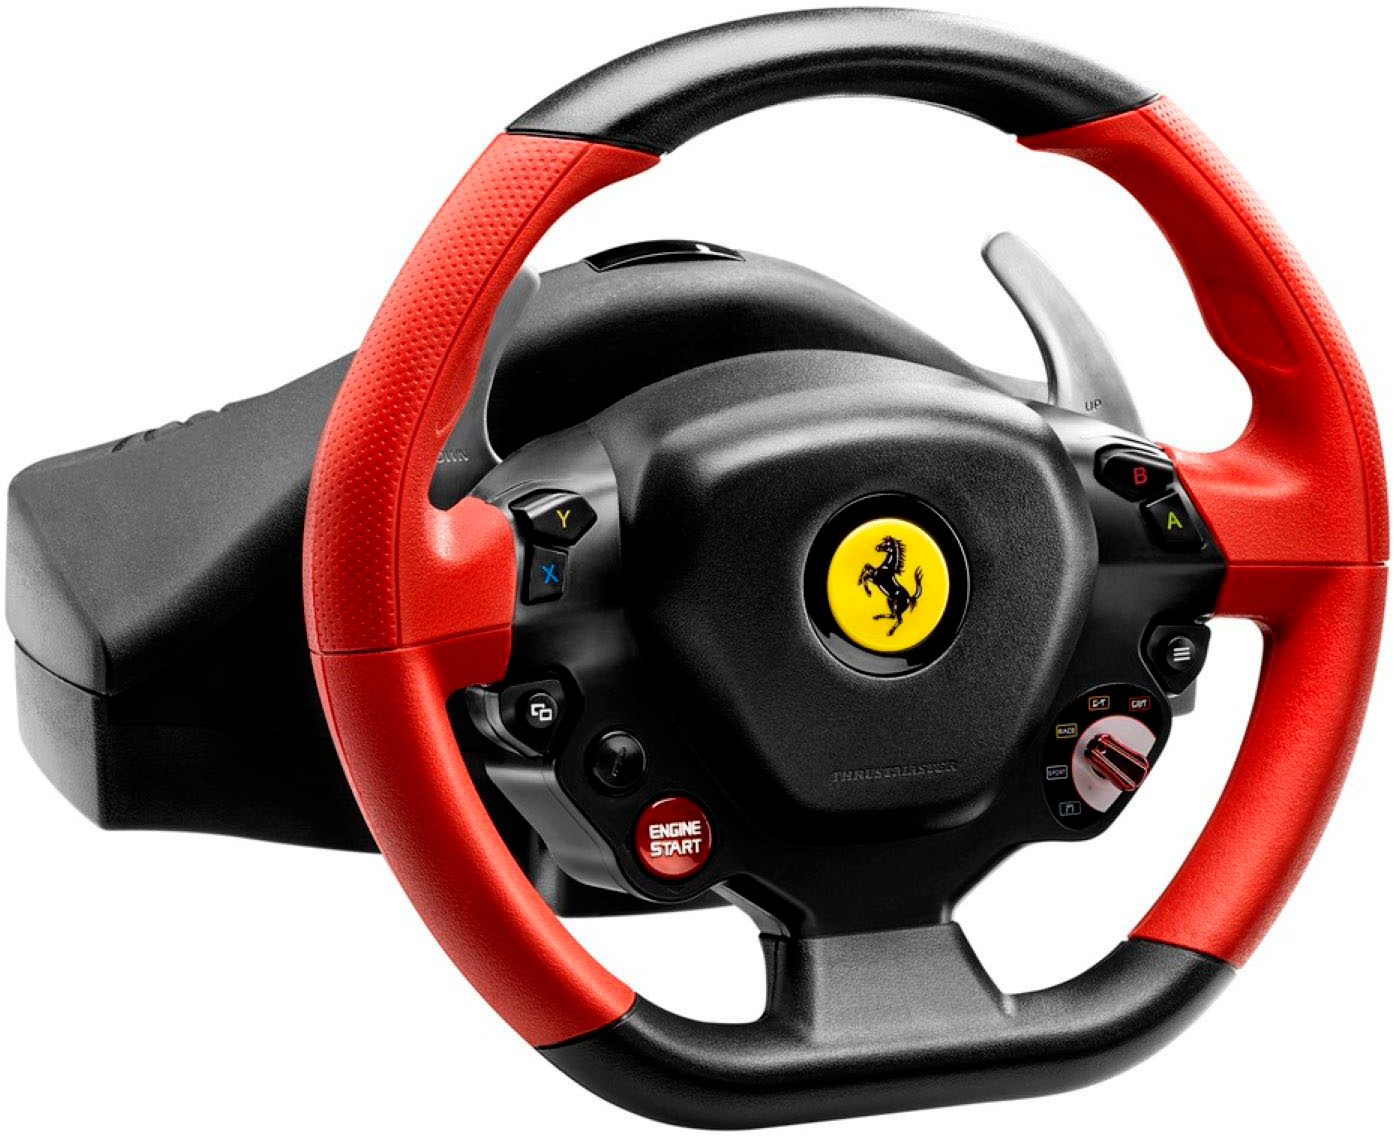 Questions and Answers: Thrustmaster Ferrari 458 Spider Racing Wheel for ...